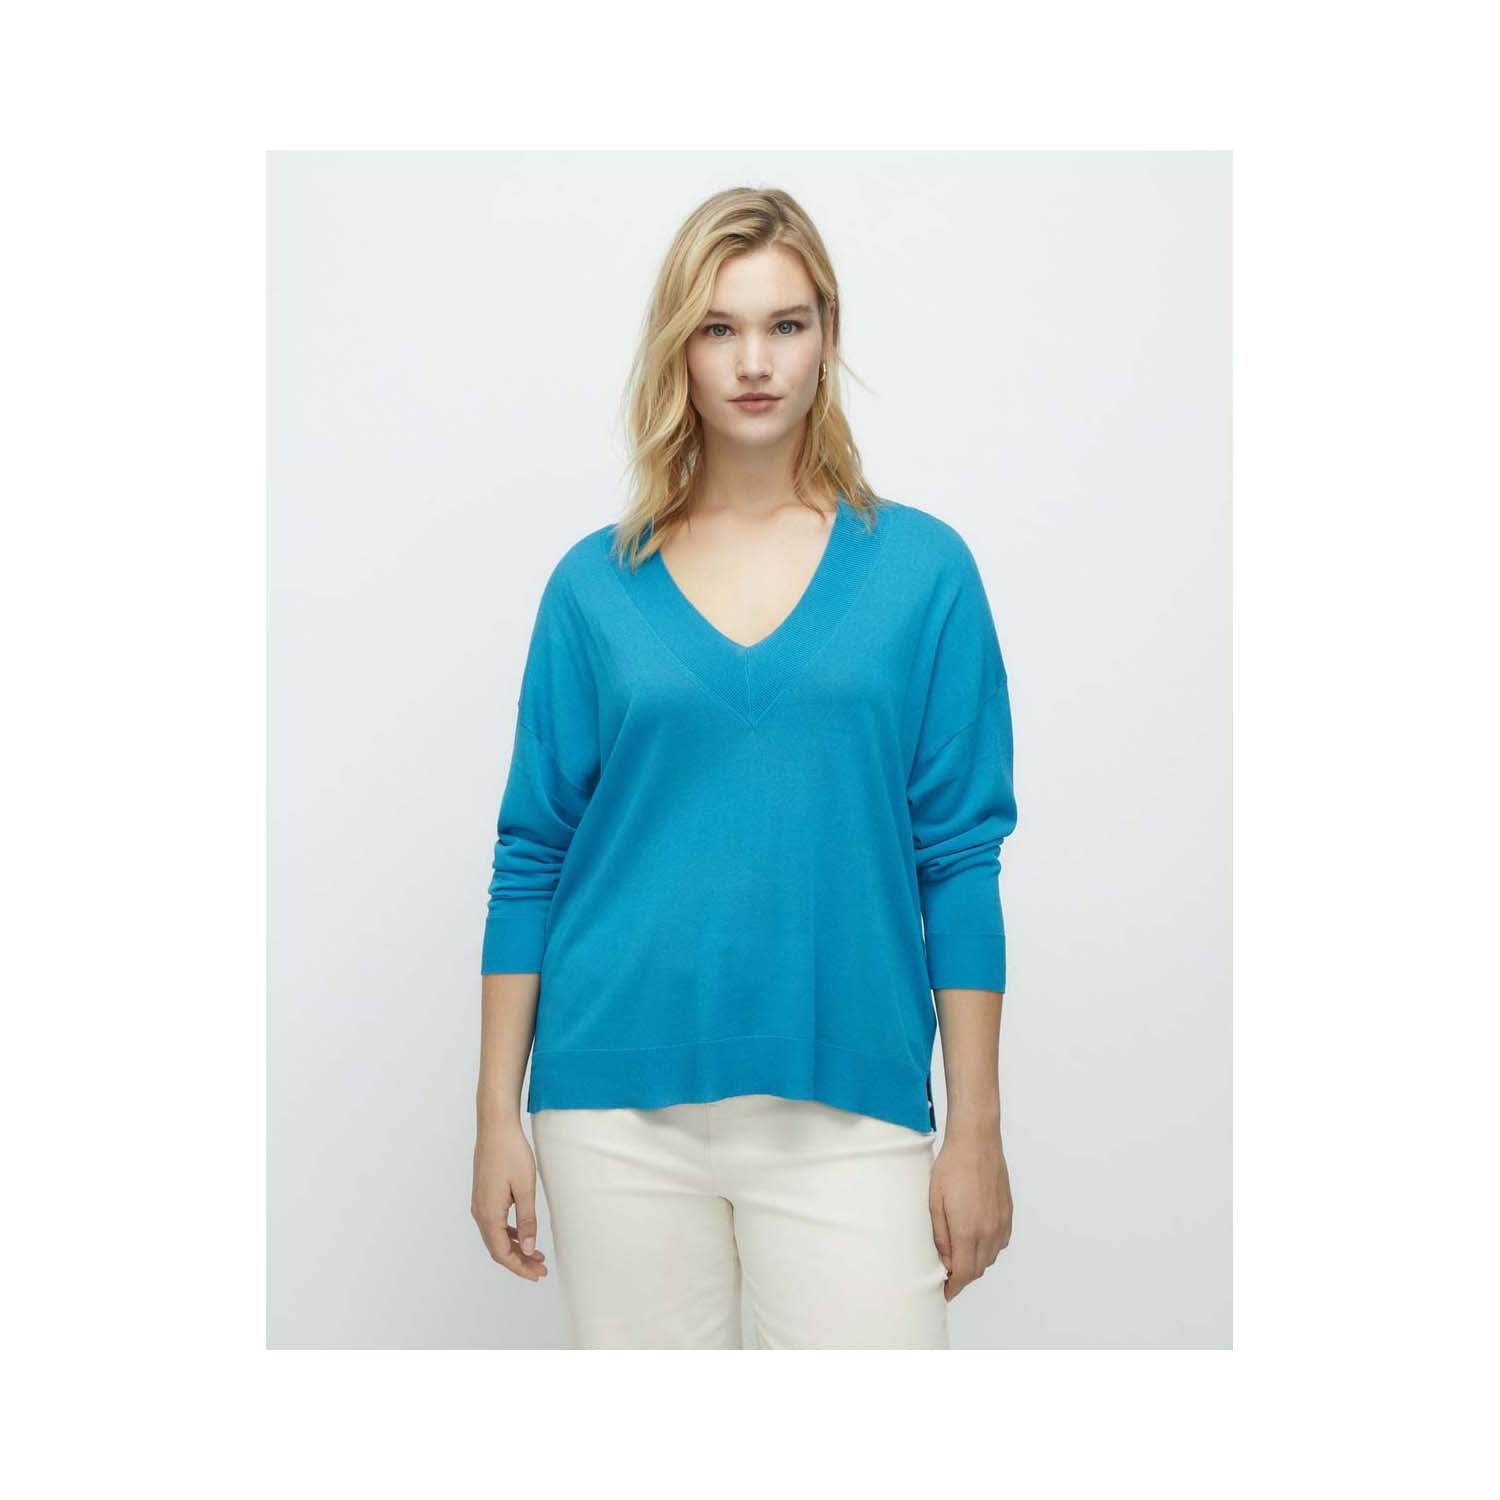 Couchel Long Sleeve V-Neck Sweater - Blue 1 Shaws Department Stores